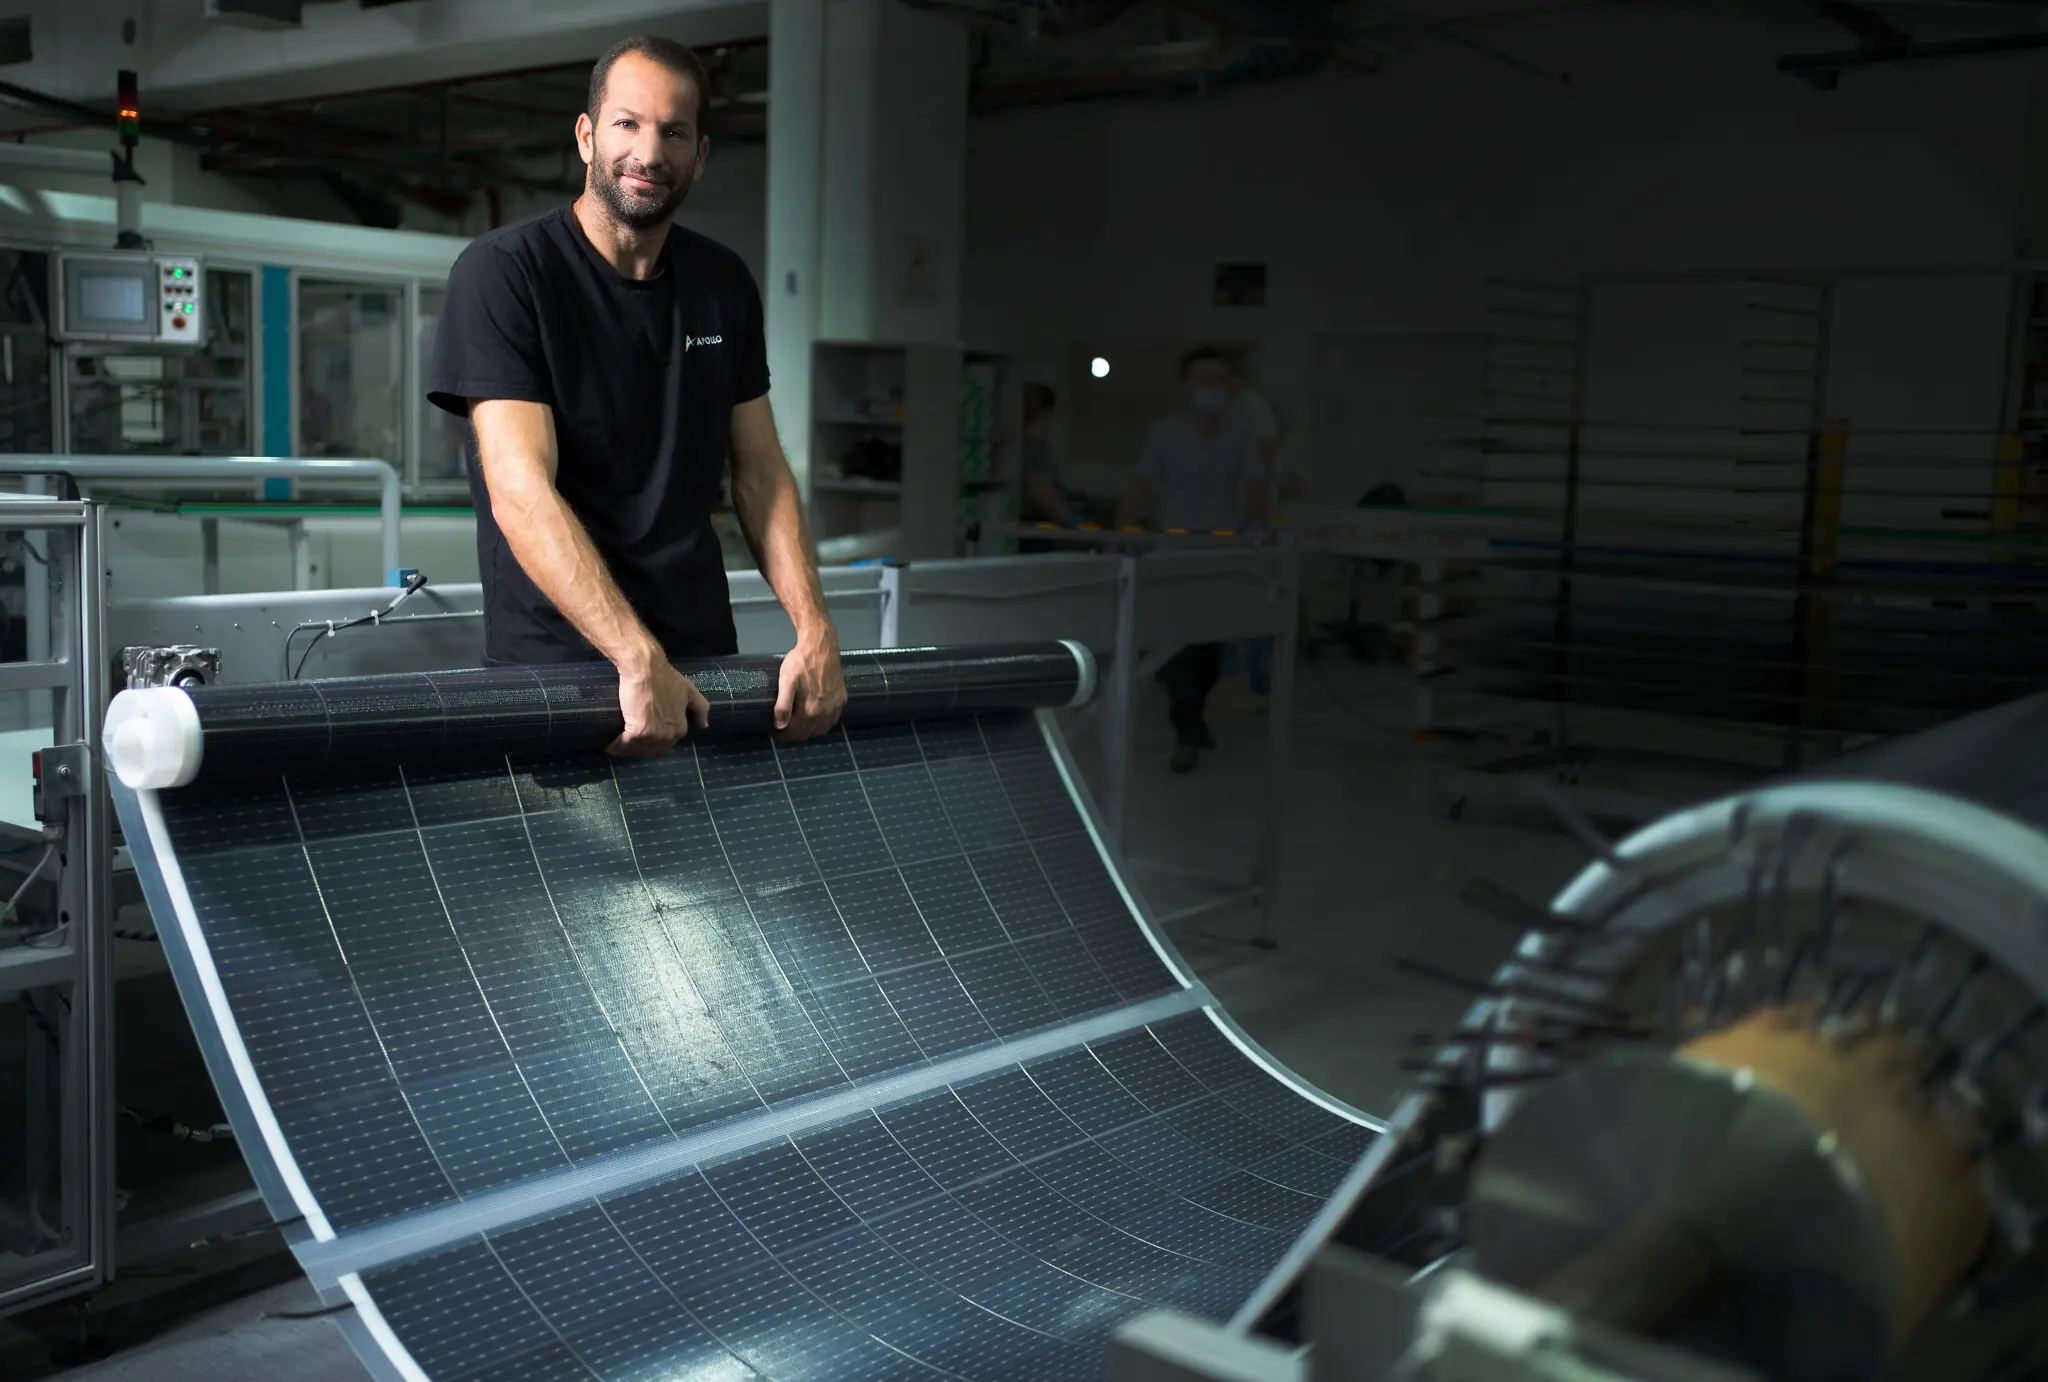 apollo solar panels - Which company solar is best